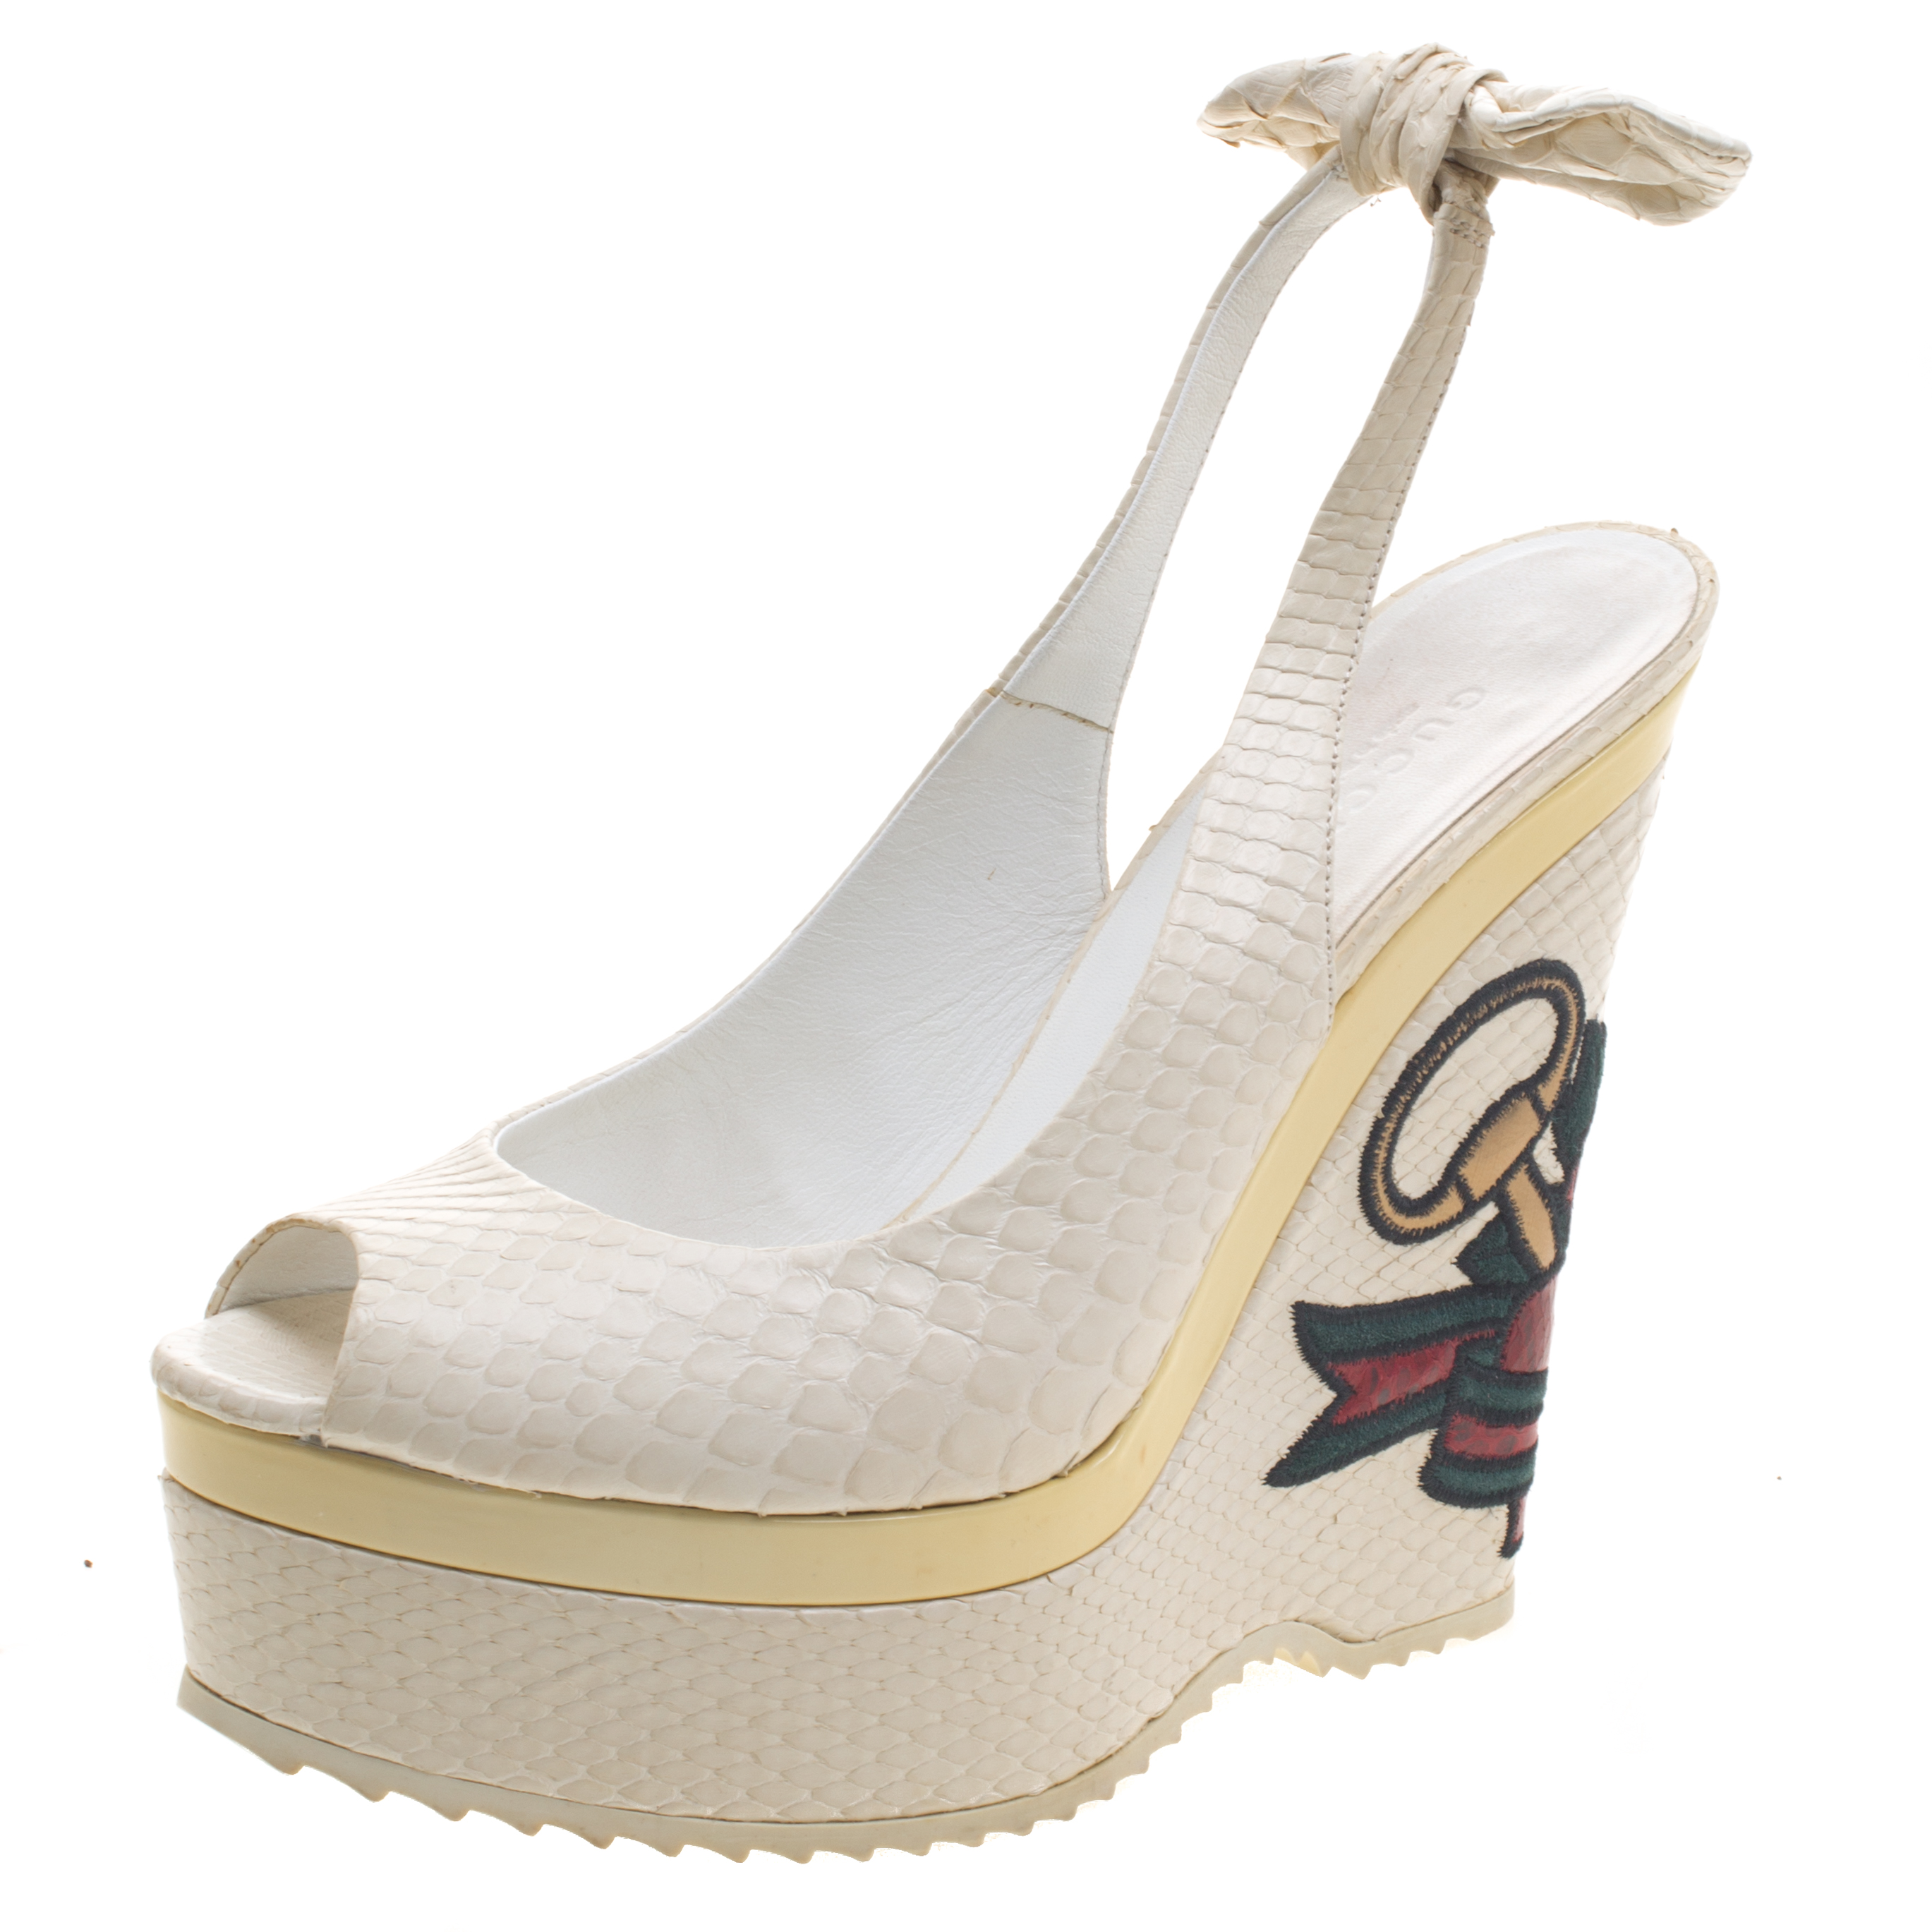 Gucci White Python Leather UNICEF Tattoo Collection Slingback Wedge Sandals Size 38.5